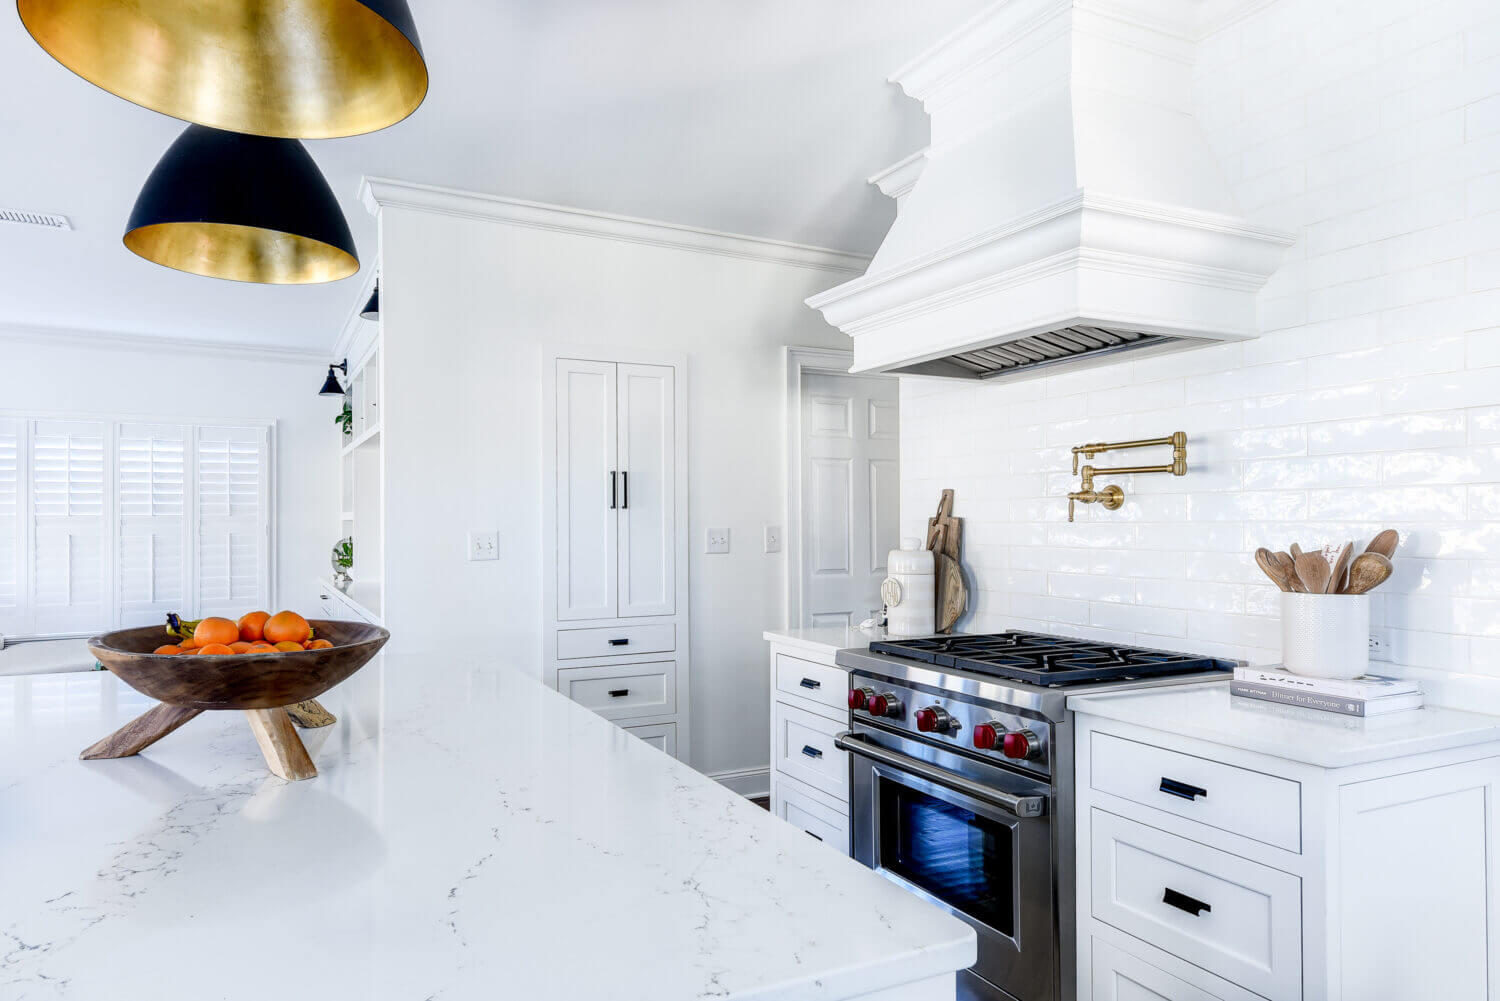 A view over the kitchen island in a white-on-white kitchen design featuring white shaker cabinets, a white independent wood hood, subway tiles, walls, and quartz countertops.